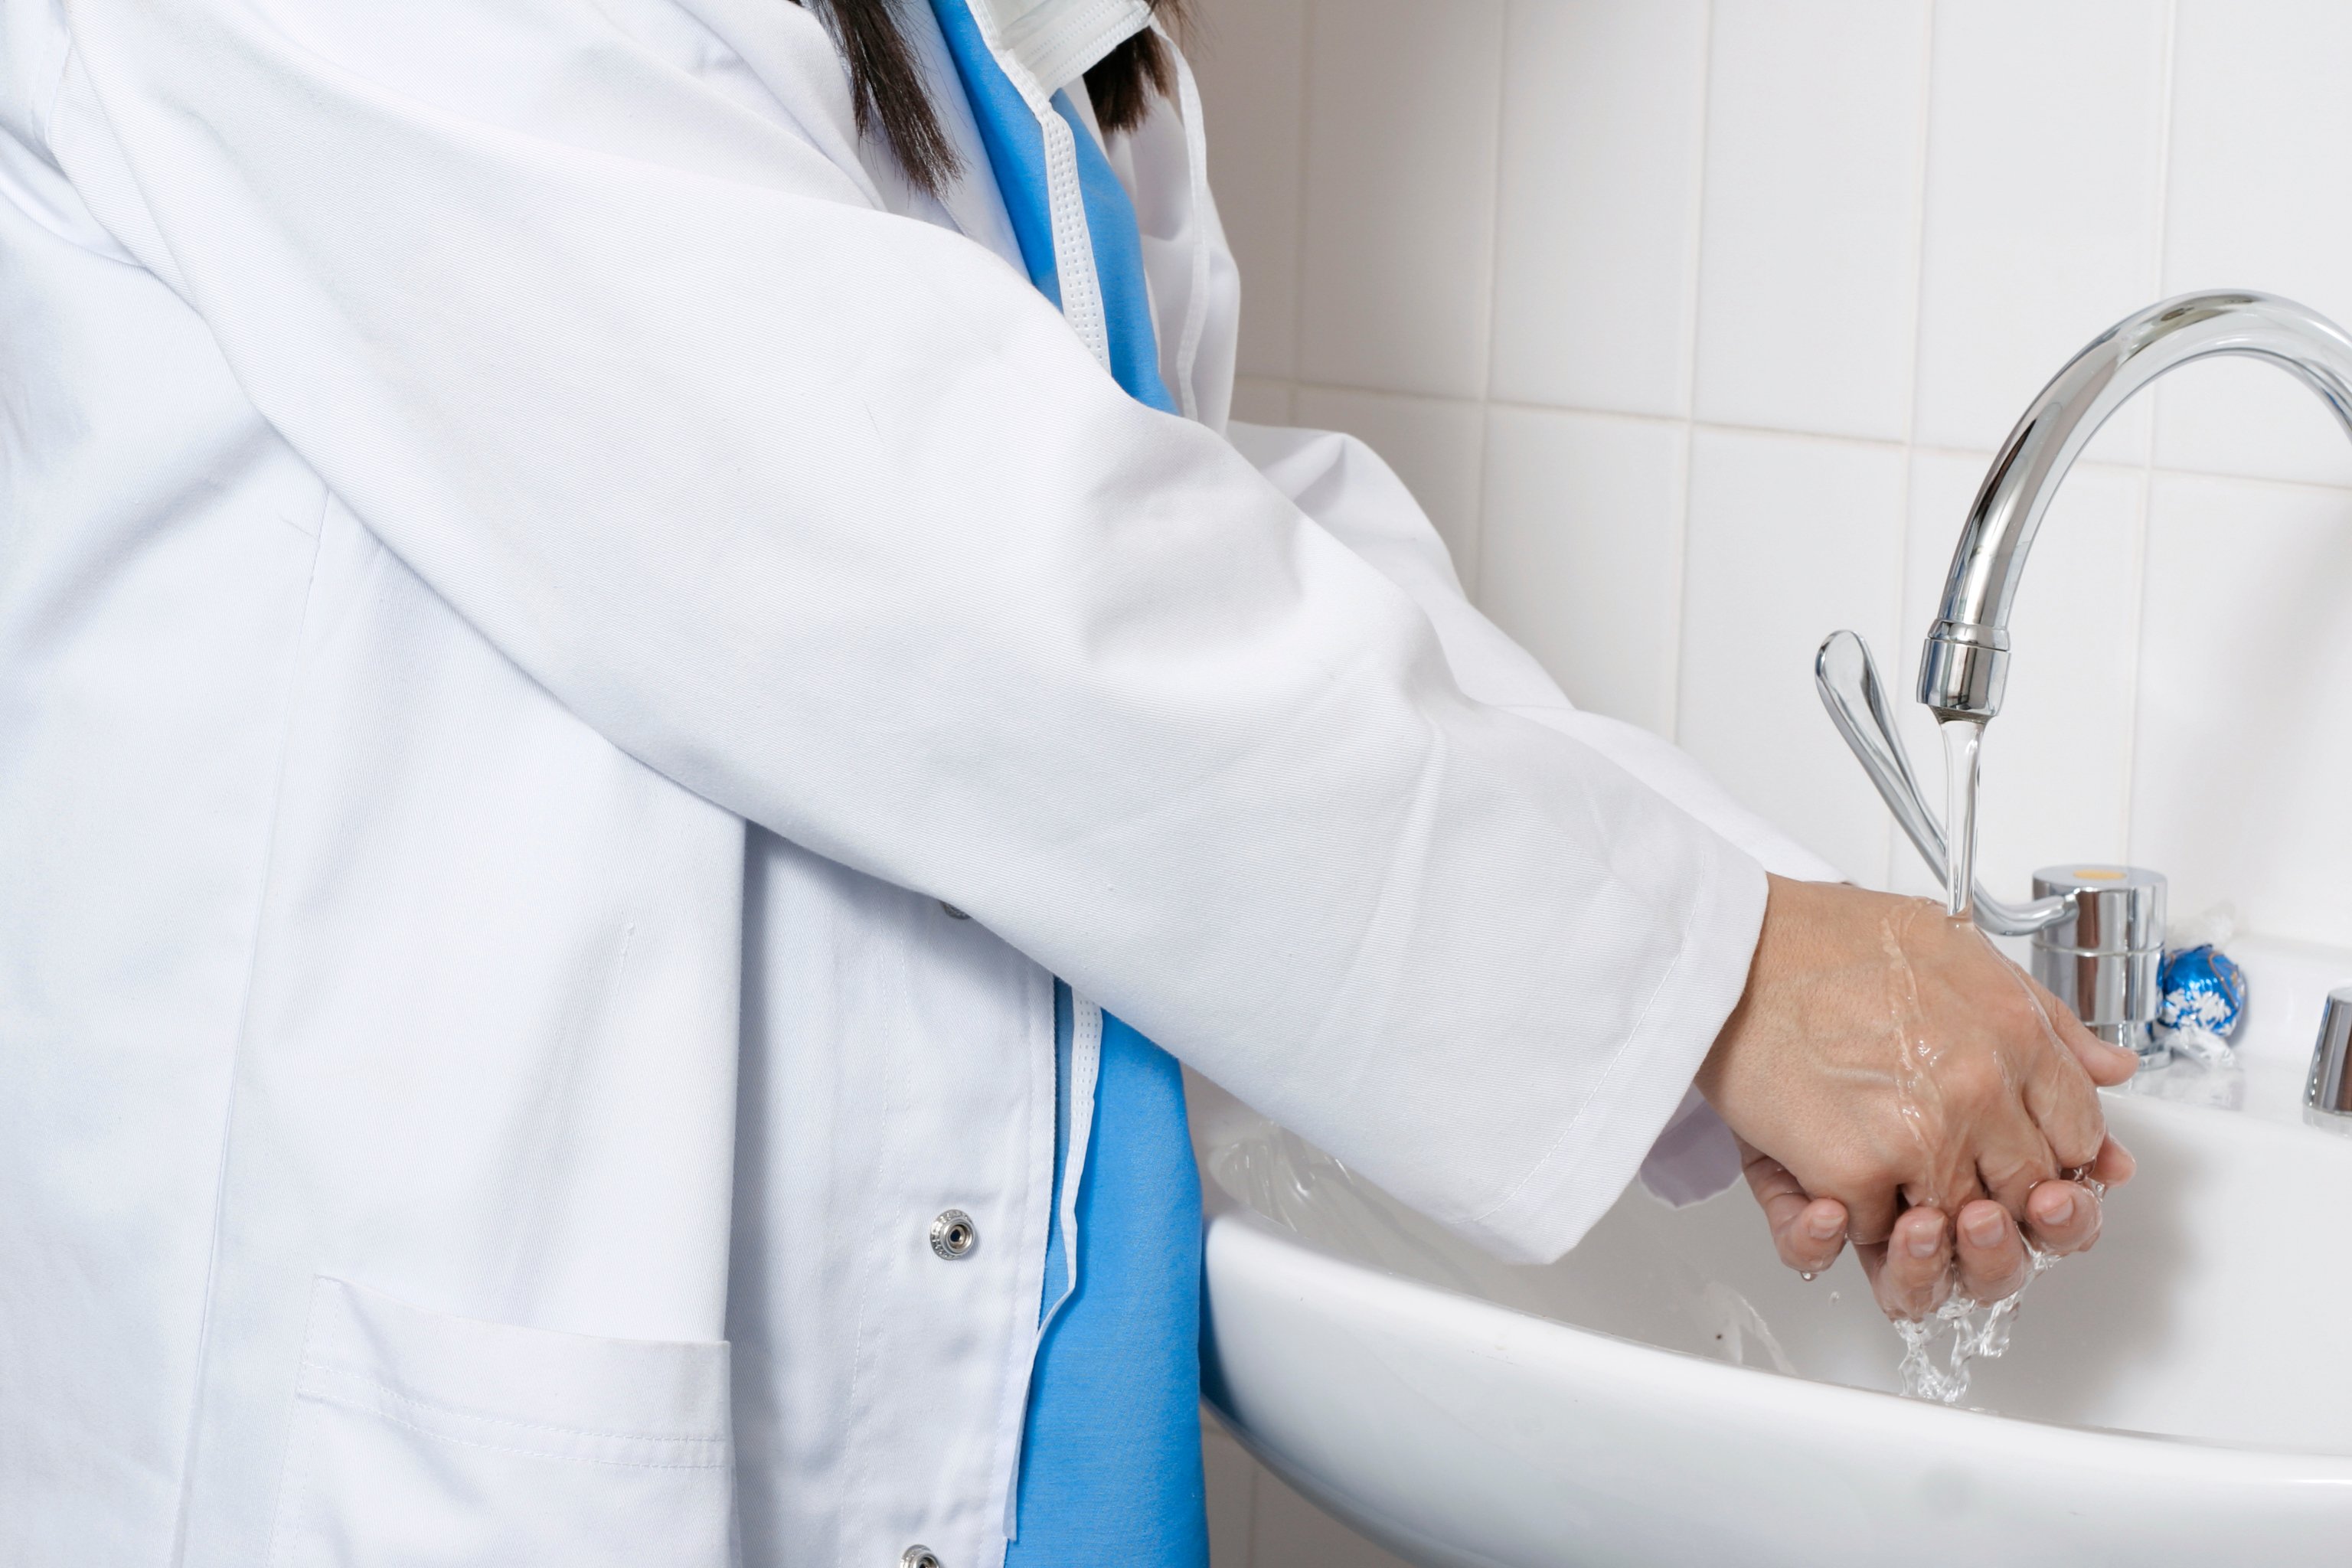 Healthcare worker in white lab coat and surgical scrubs washes his hands in sink